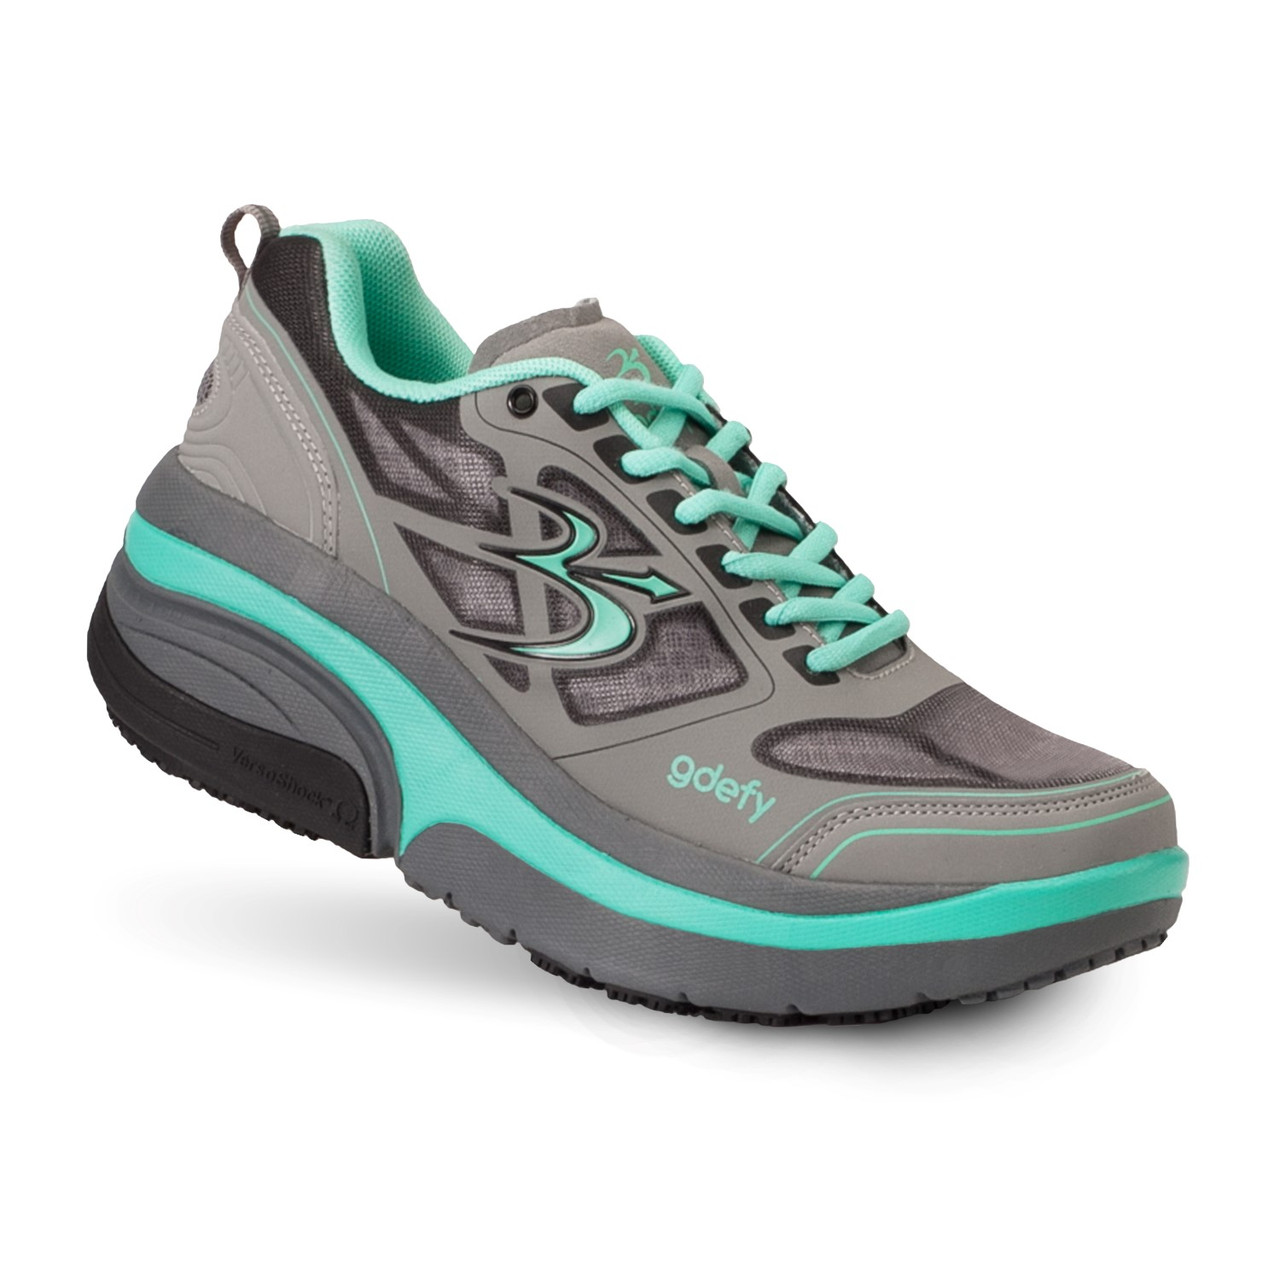 6 Favorite Athletic Shoes for Women - Ambitious Kitchen